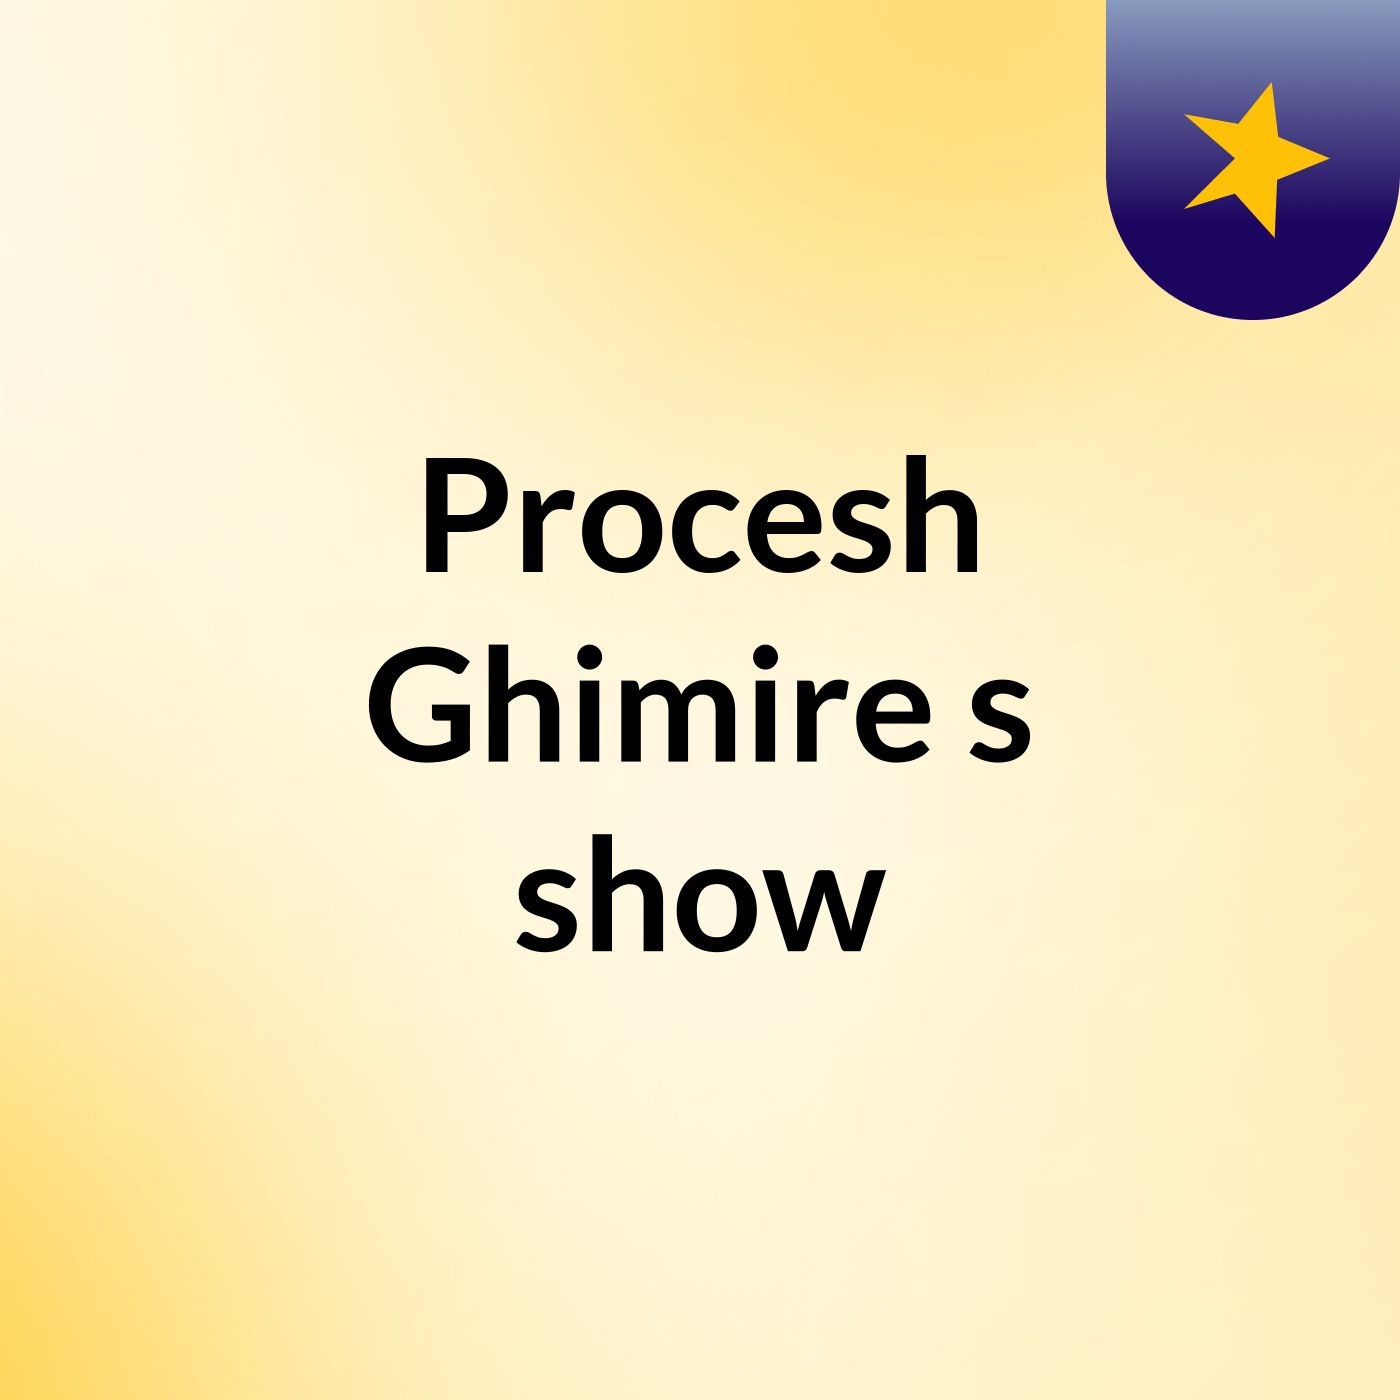 Procesh Ghimire's show